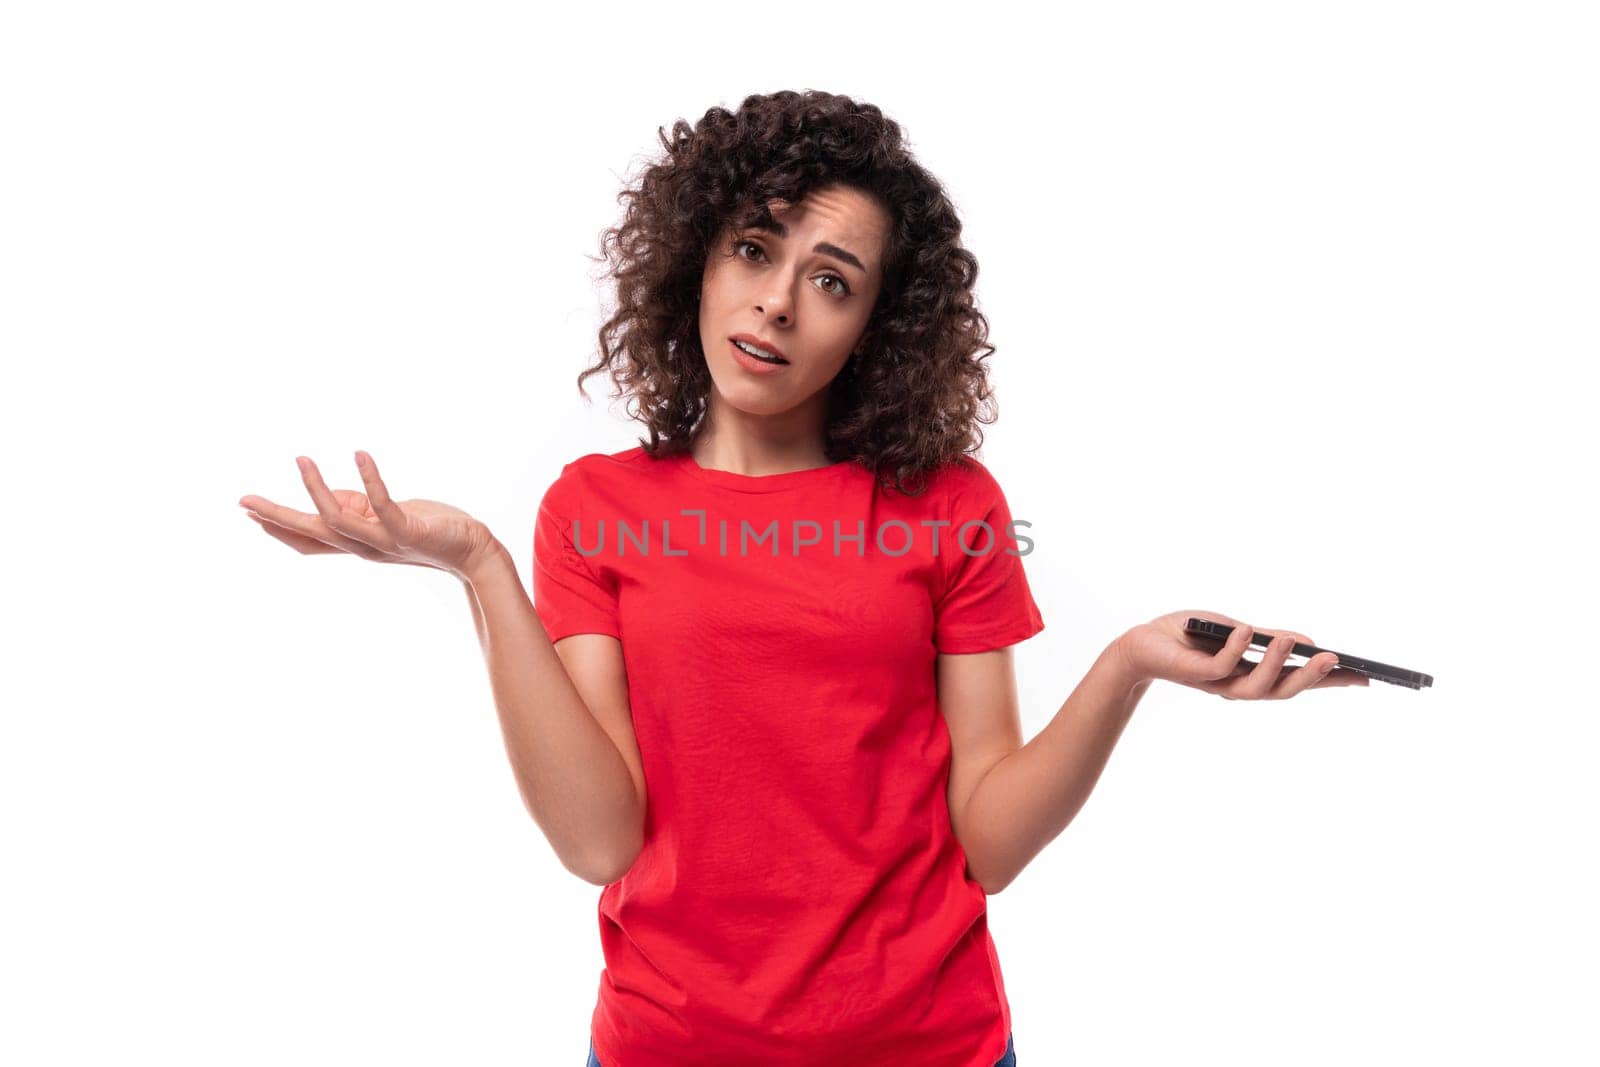 caucasian young pretty curly brunette woman in a red t-shirt spreads her arms in excitement holding a smartphone in her hand.